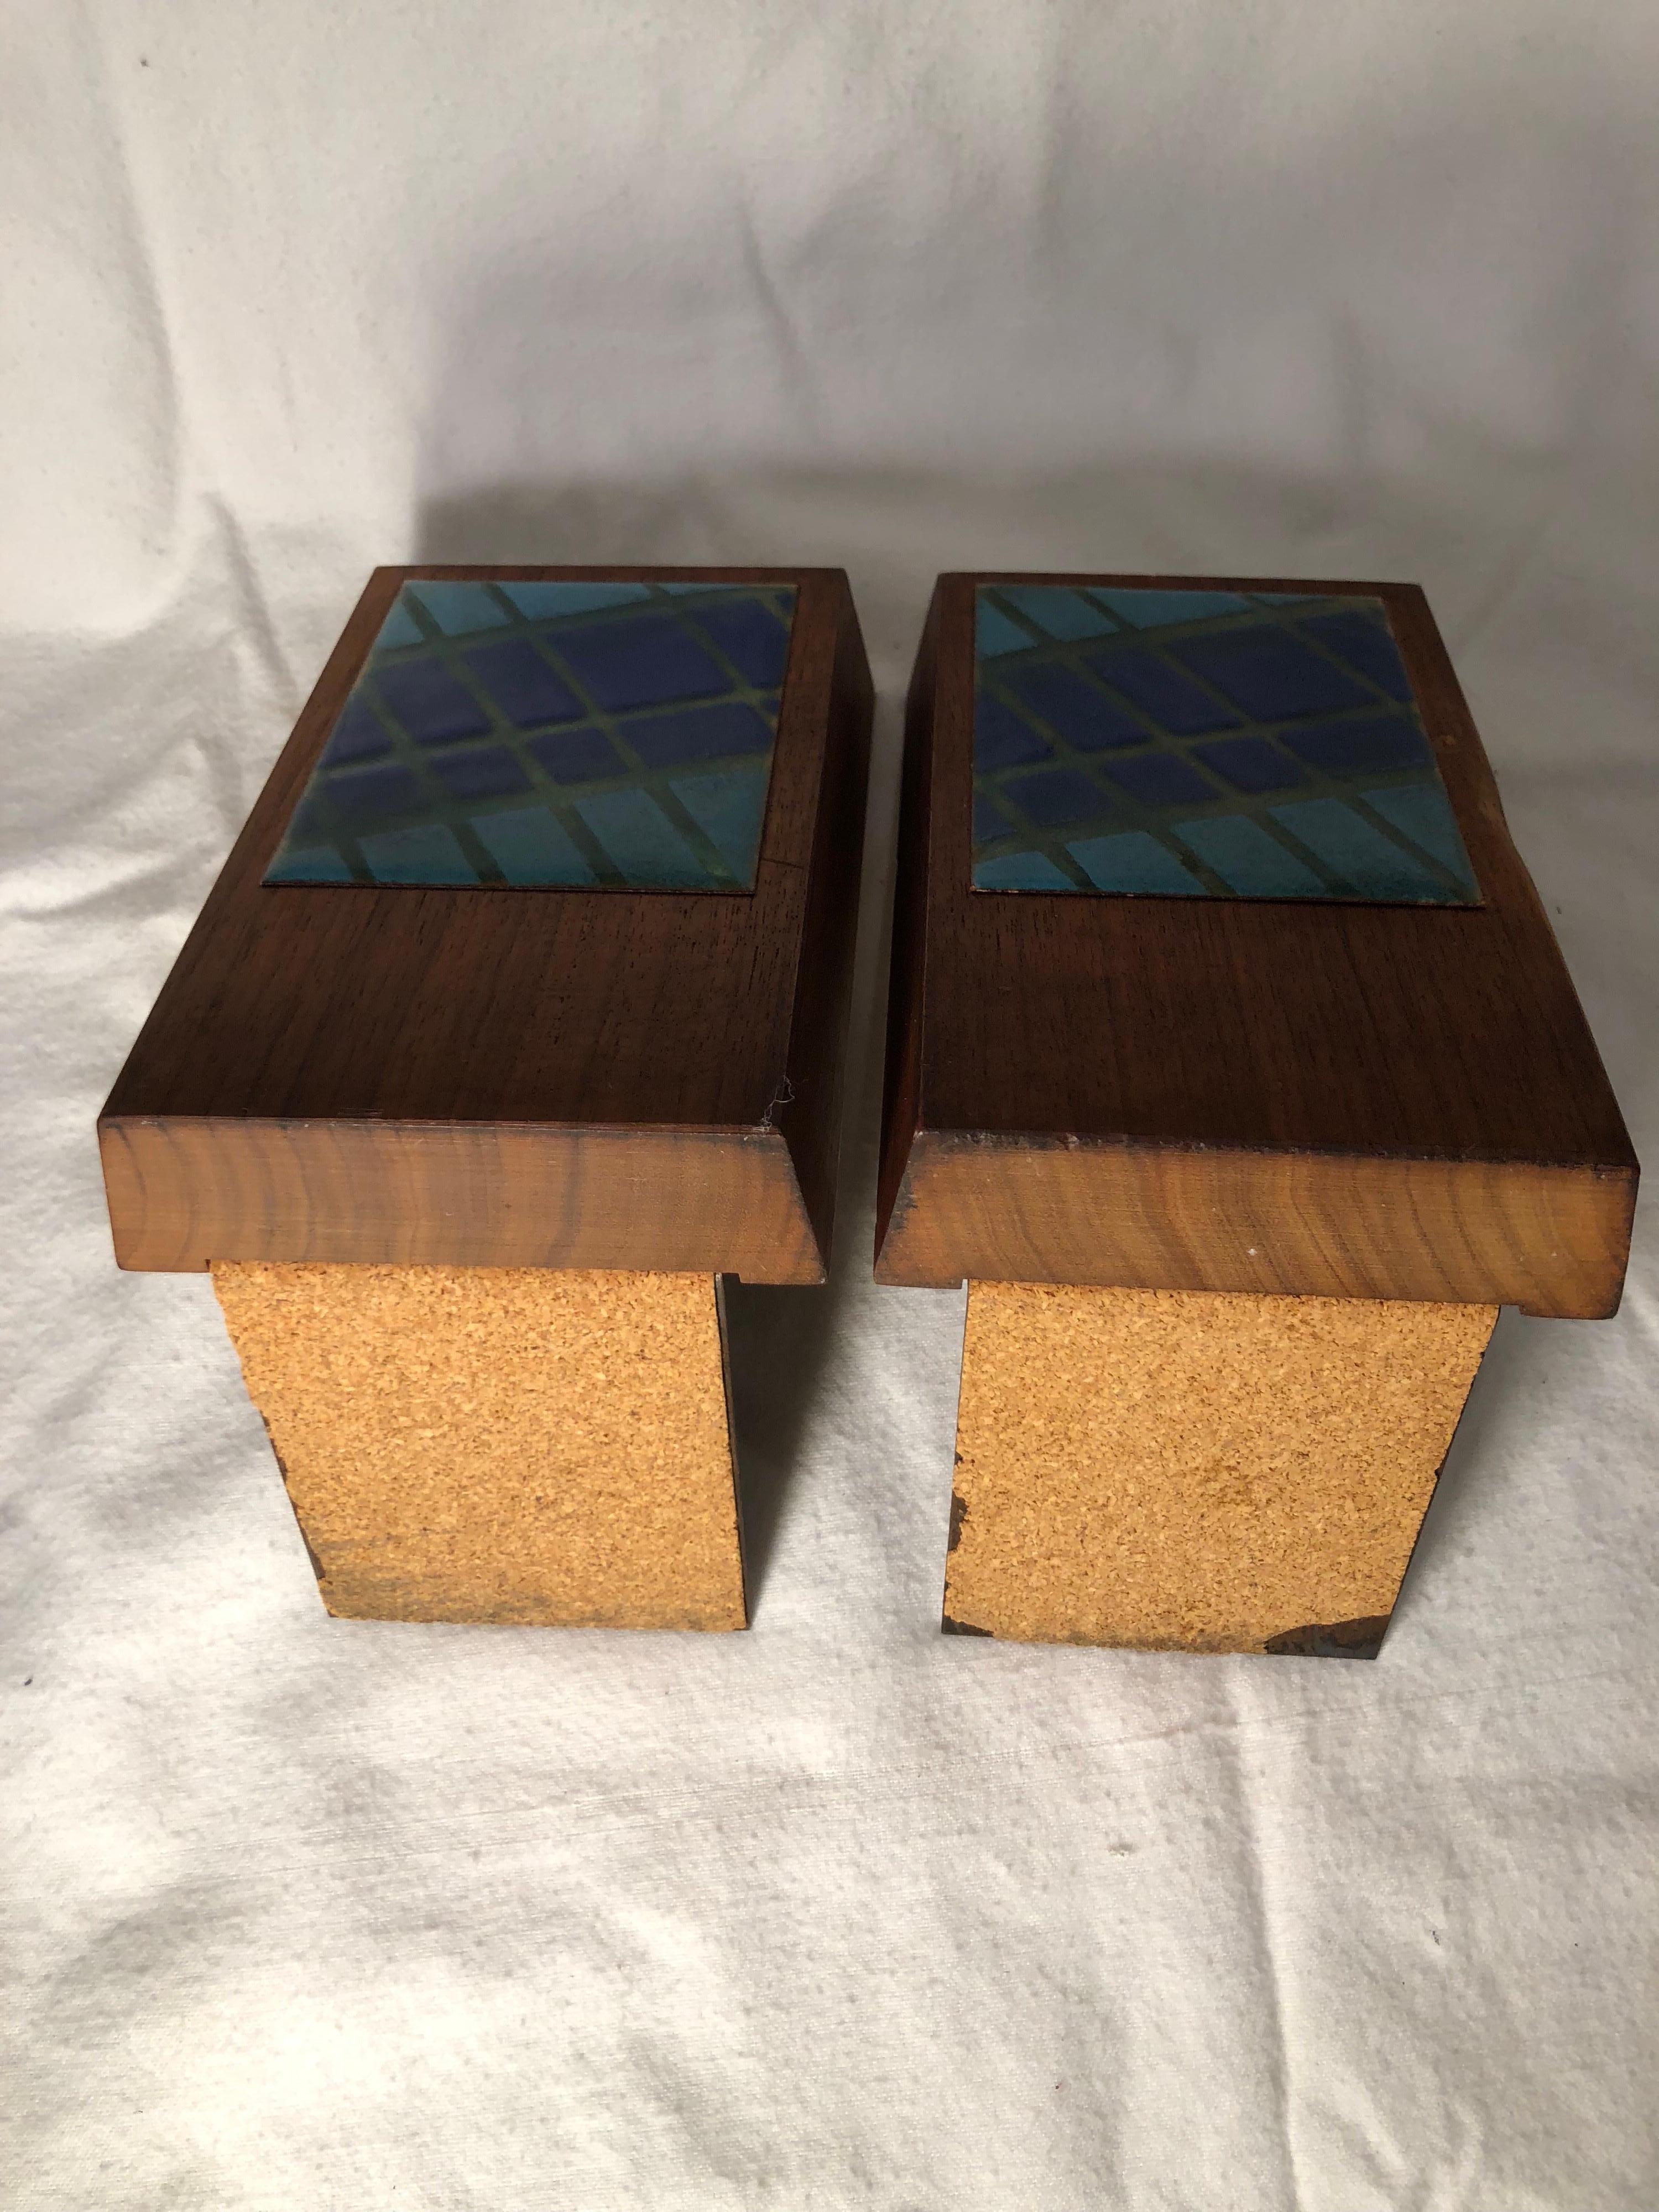 Pair of Mid-Century Modern Walnut and Enamel Bookends by Ernest John For Sale 7